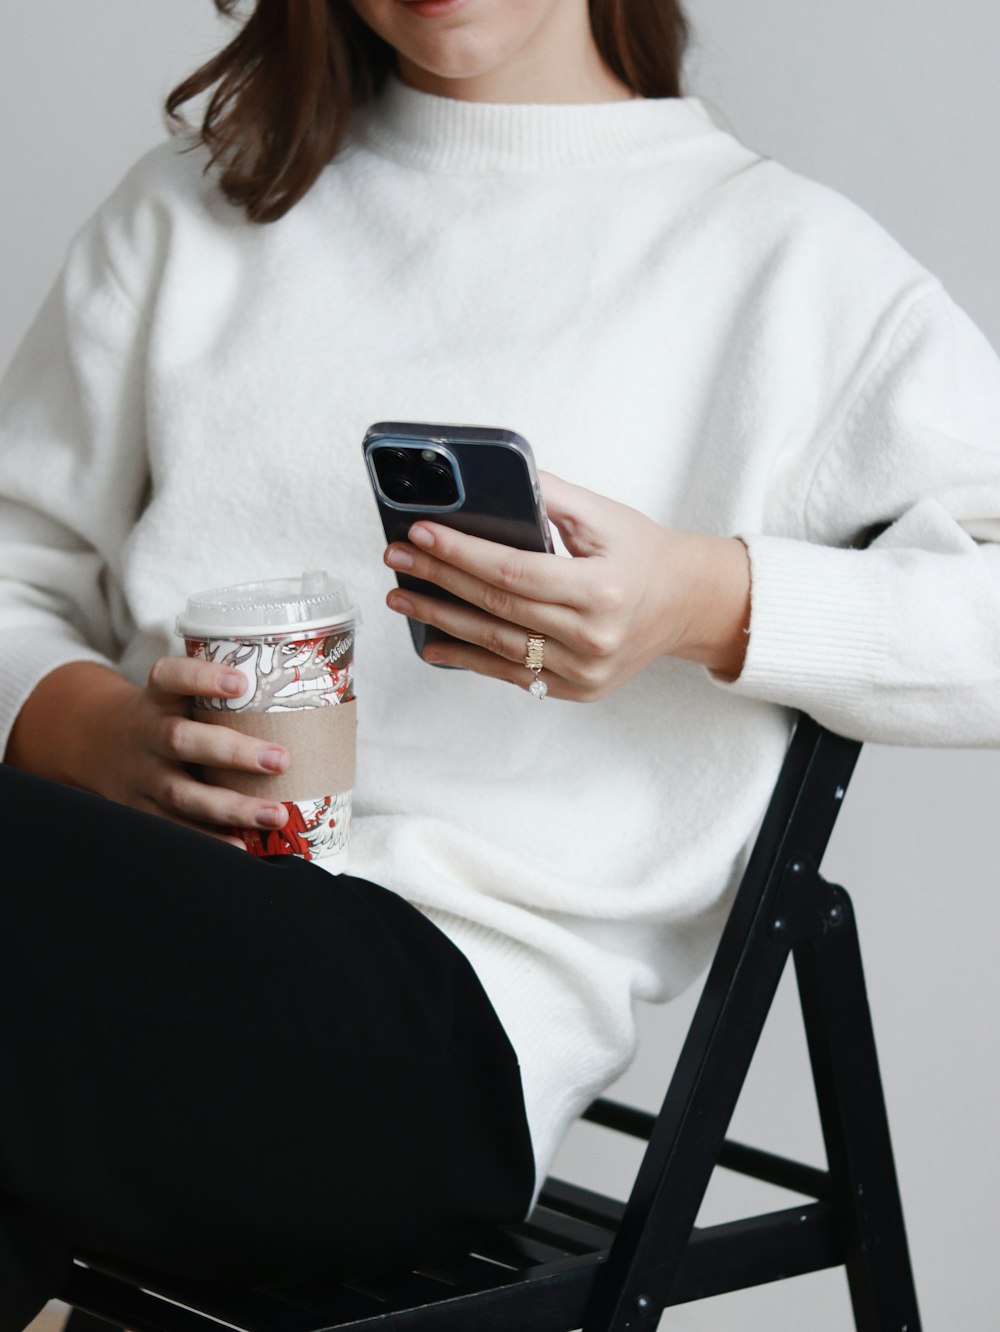 a woman sitting in a chair holding a cup of coffee and a cell phone